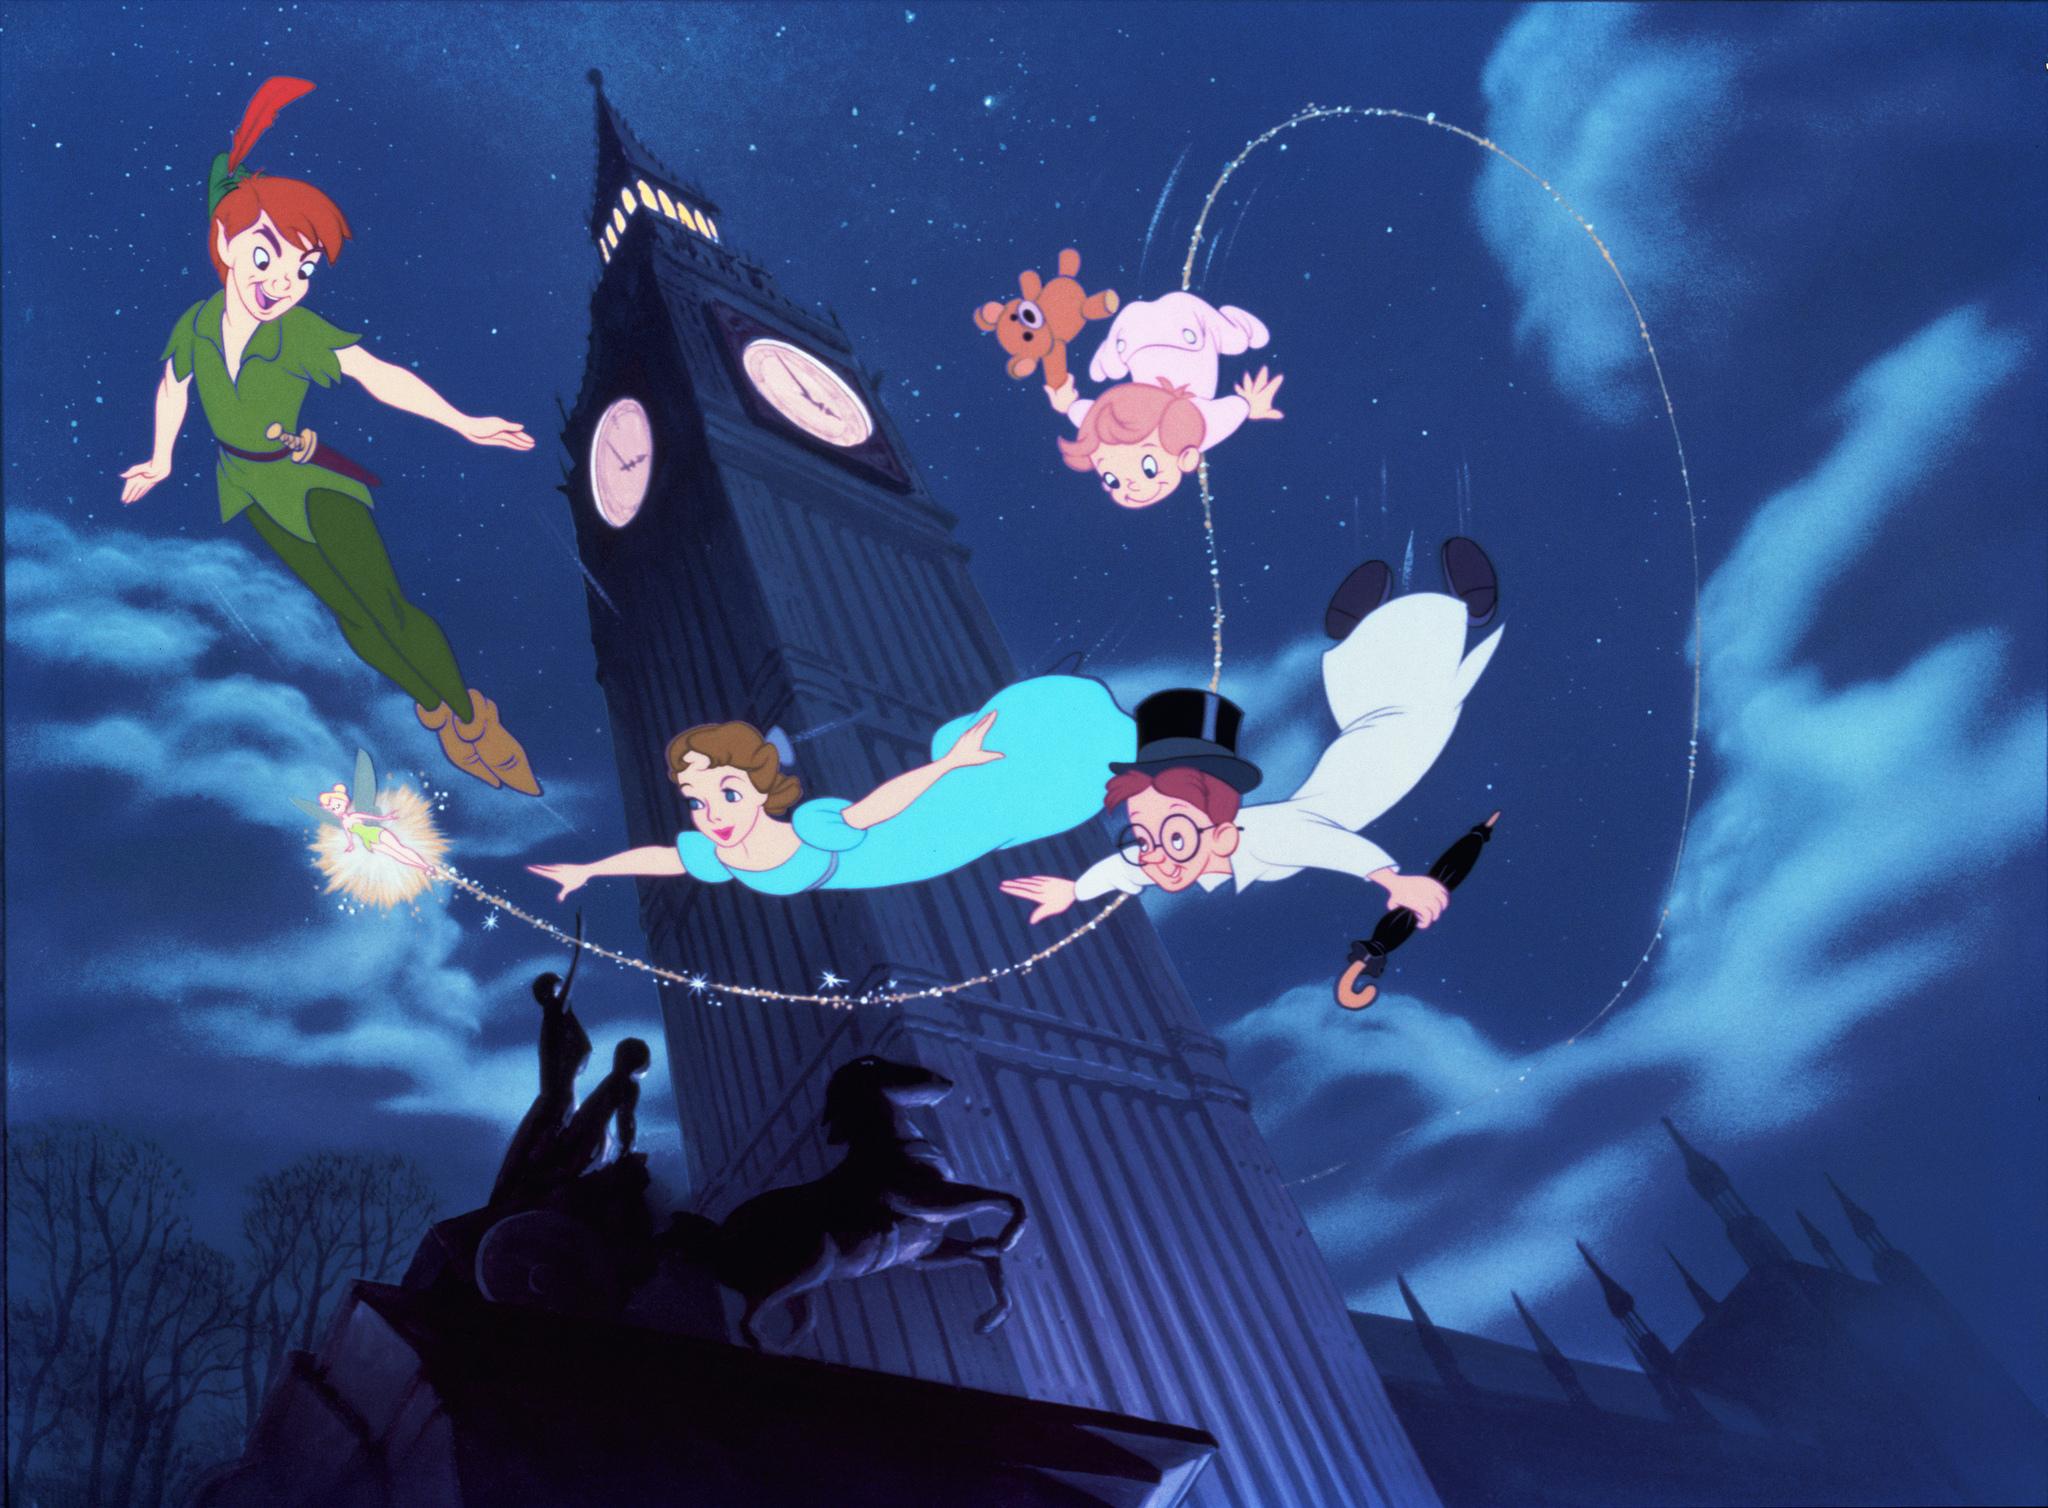 Disney Developing a Live-Action Peter Pan